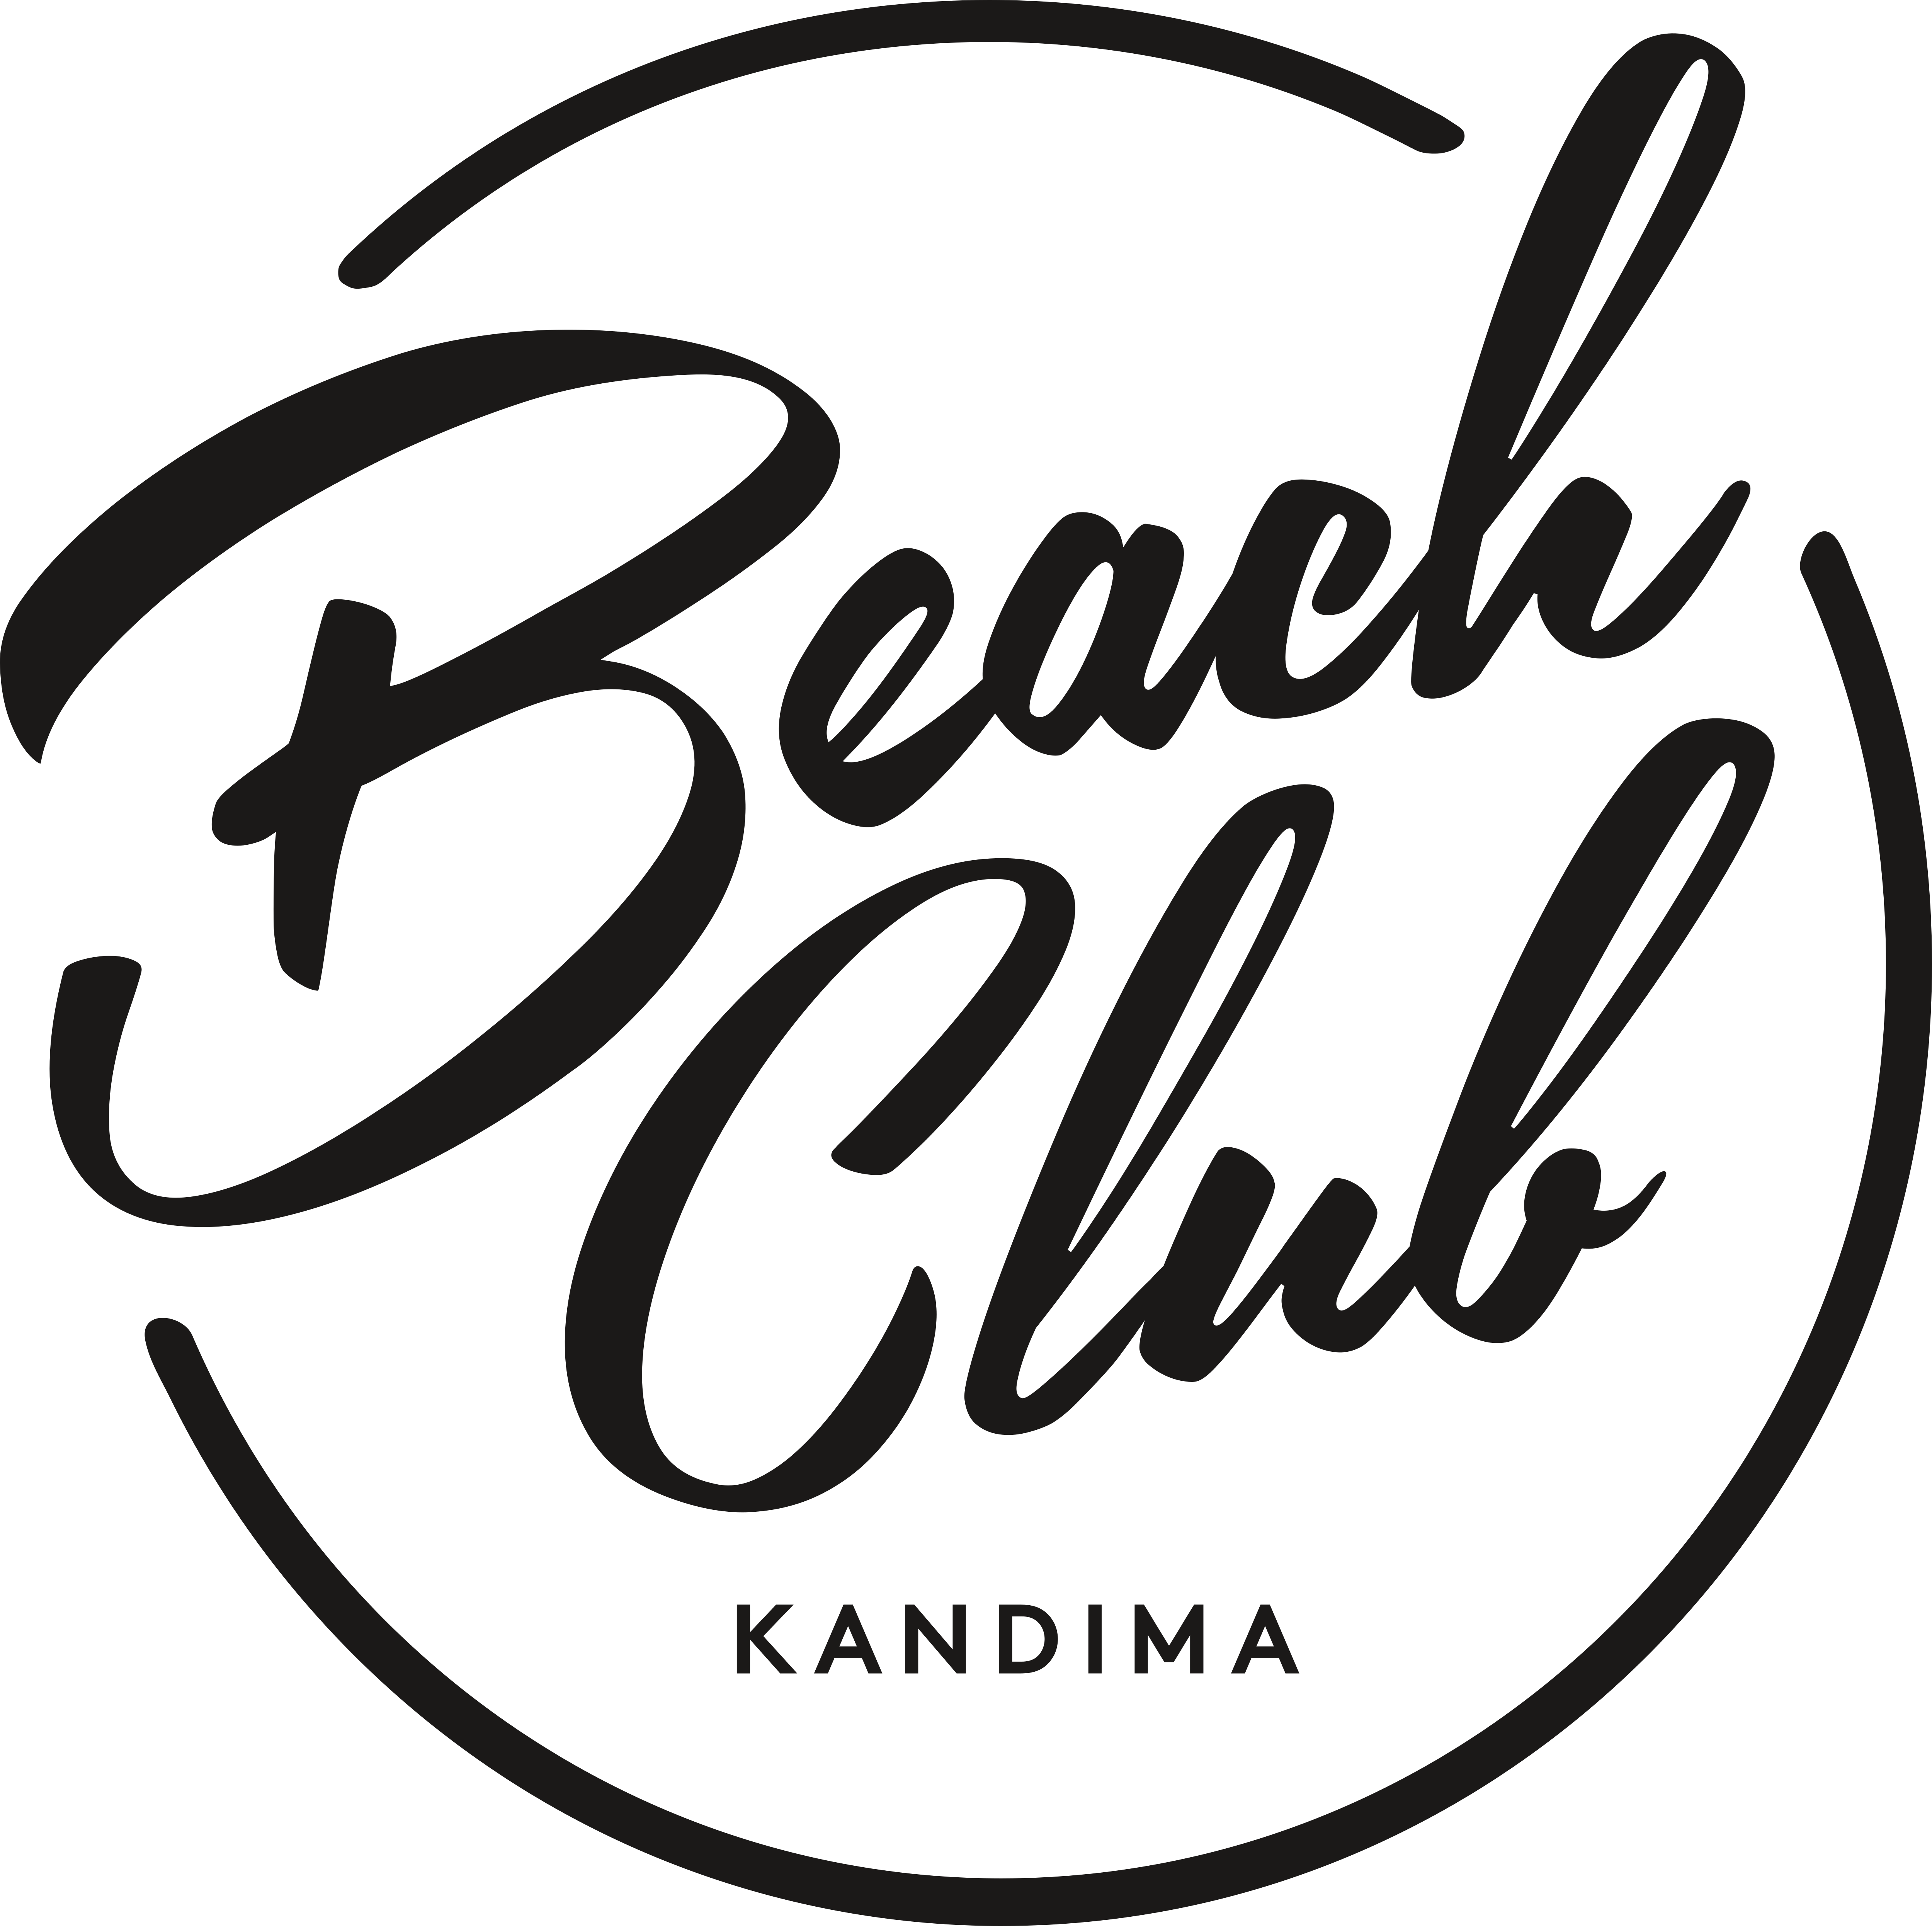 Beach Club Moscow 847 Logo Png Transparent Svg Vector Freebie Supply Images